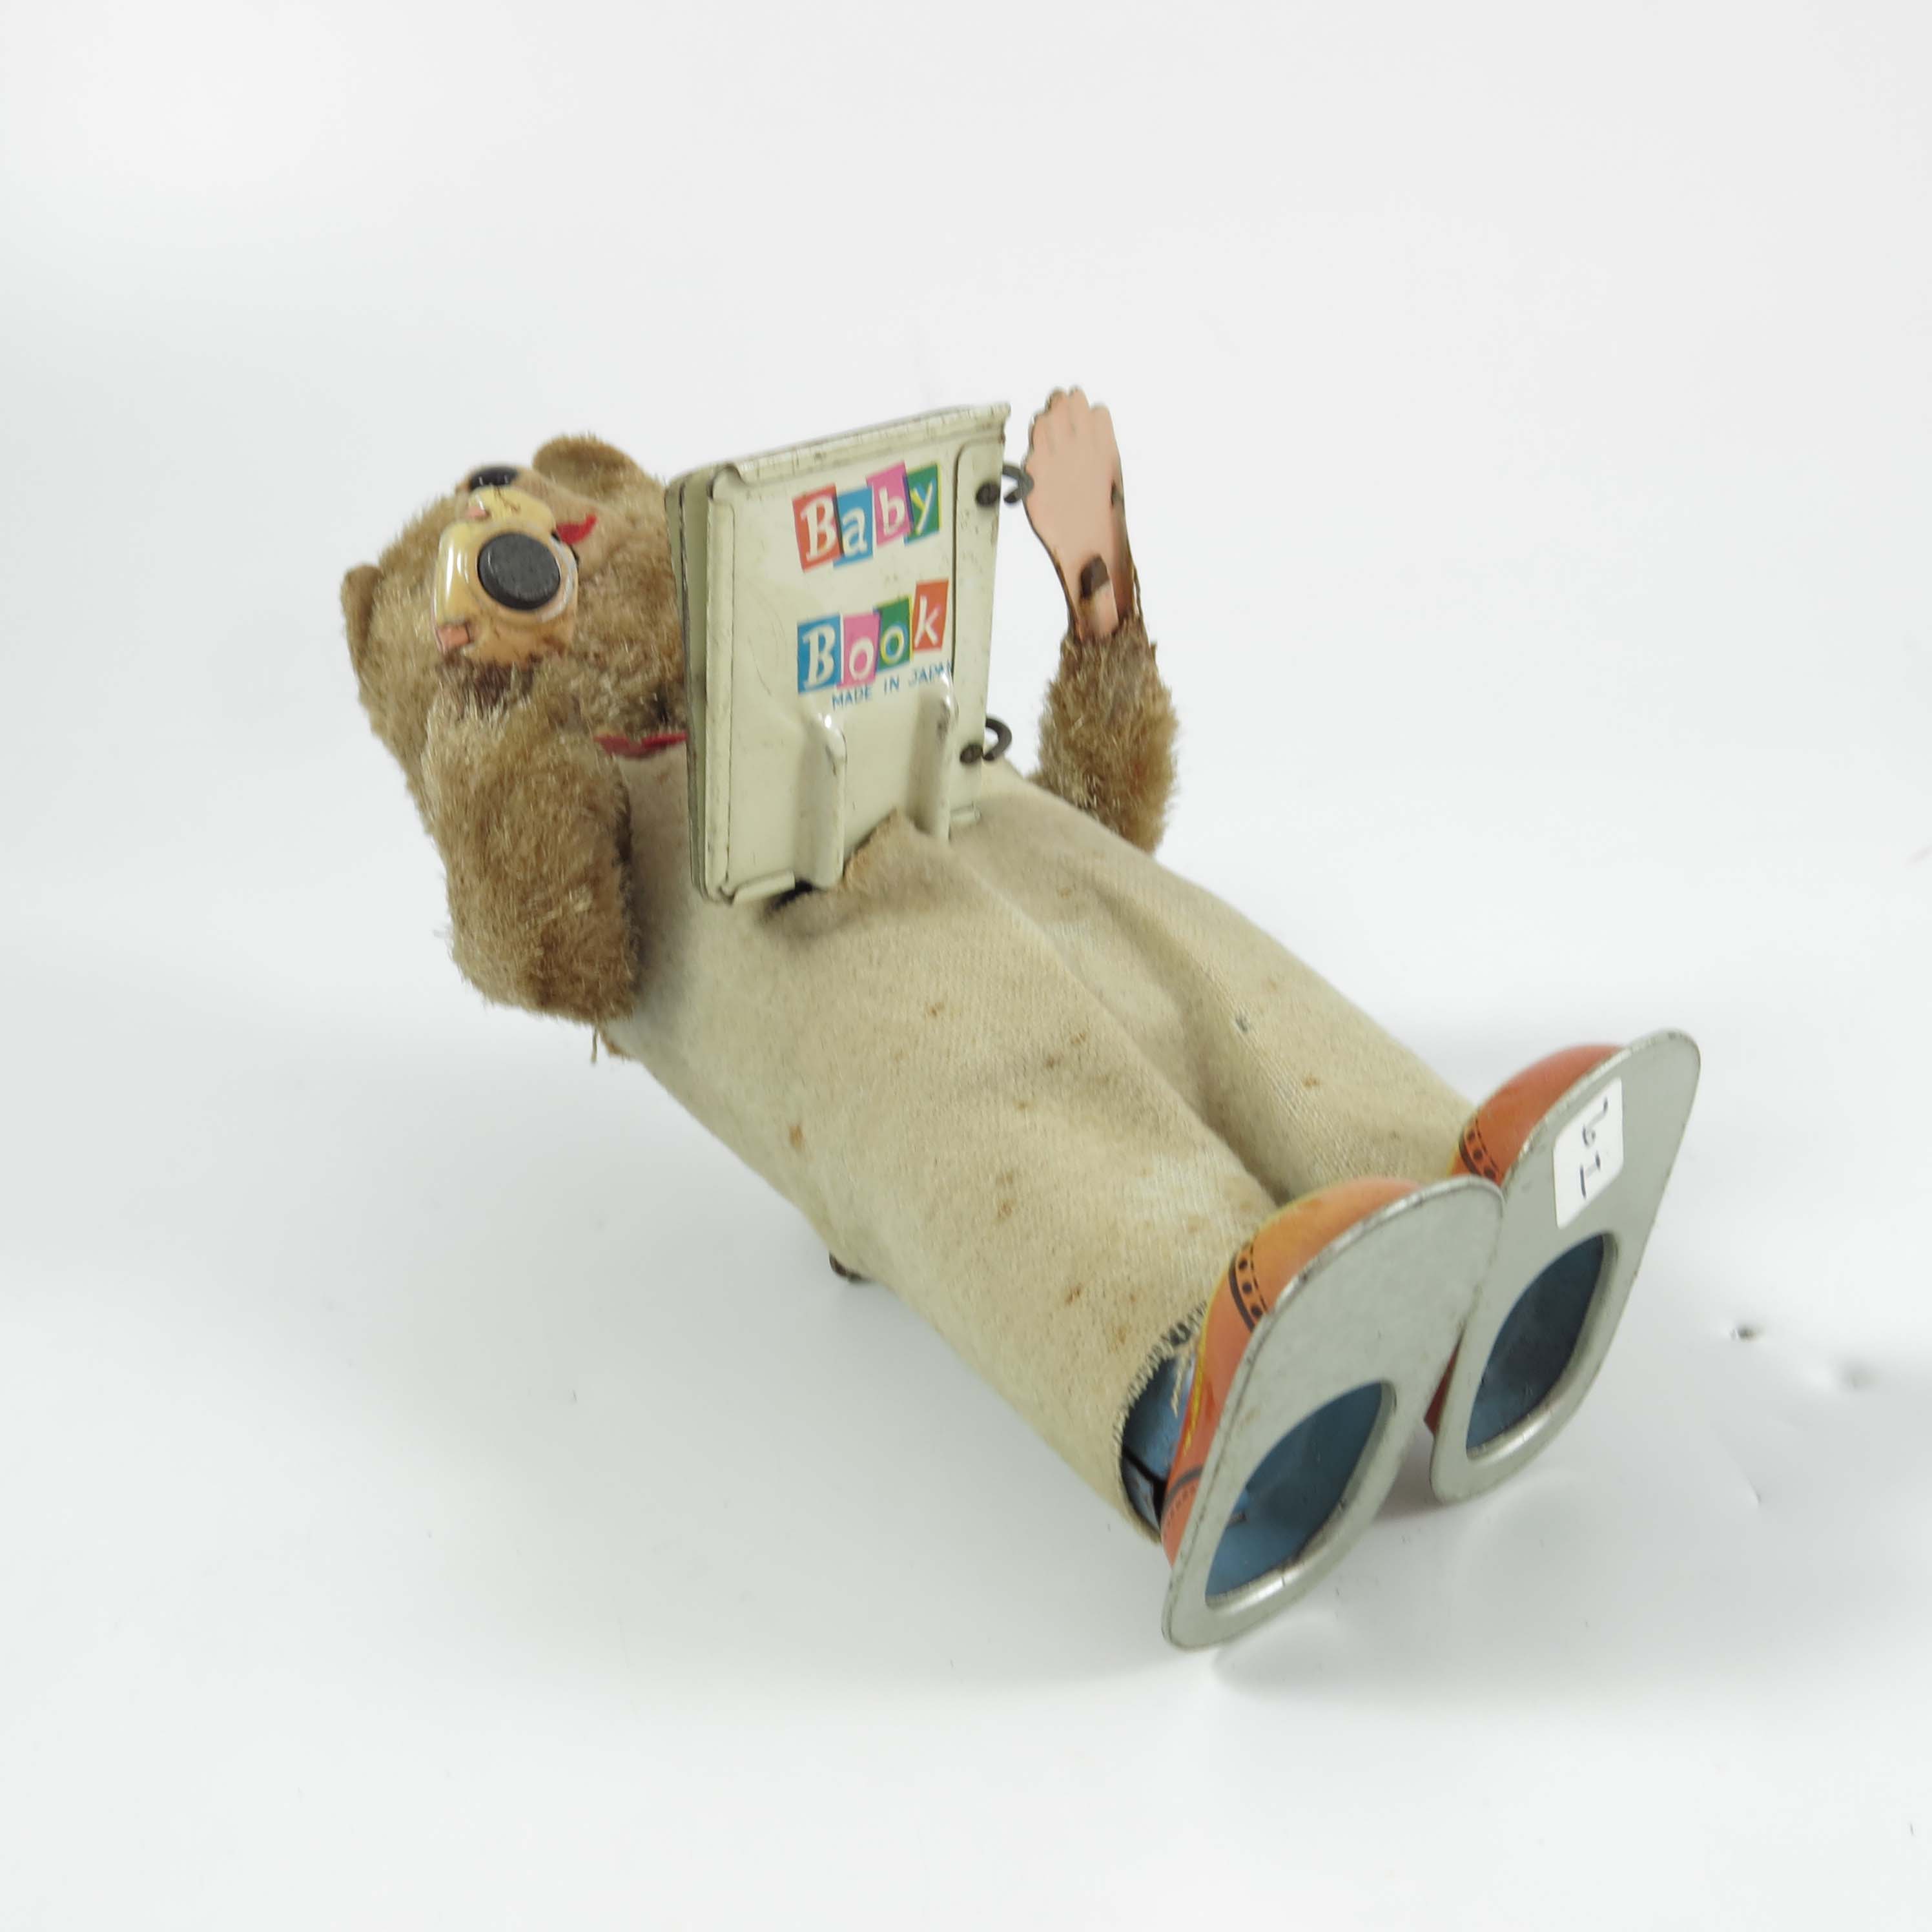 CLOCKWORK, TIN PLATE, AMERICAN FOOTBALL MONKEY, TPS MADE IN JAPAN, AND A CLOCKWORK BEAR WITH A BOOK - Image 7 of 7